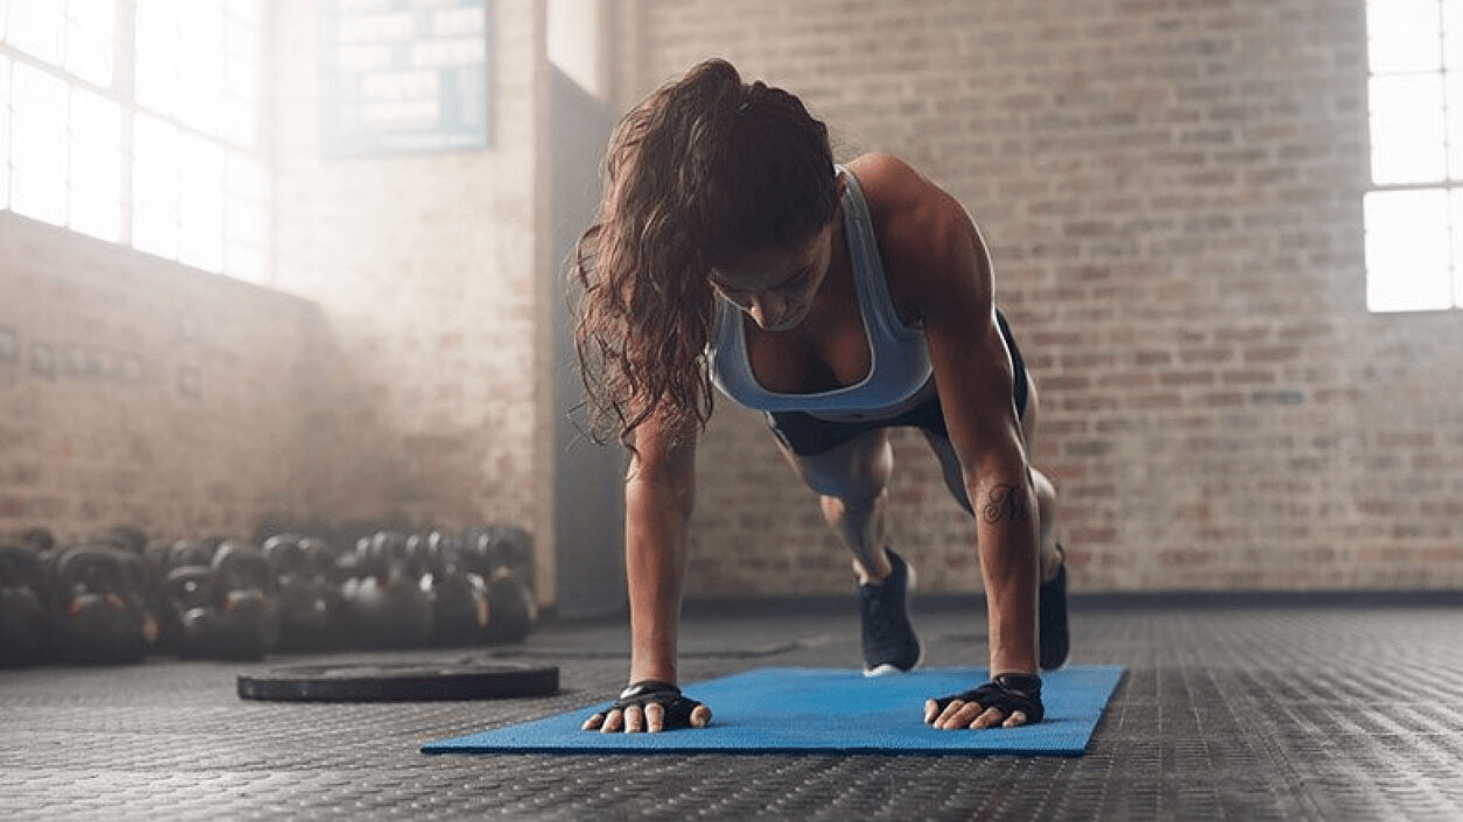 Standard or classic push ups will help you strengthen your upper body